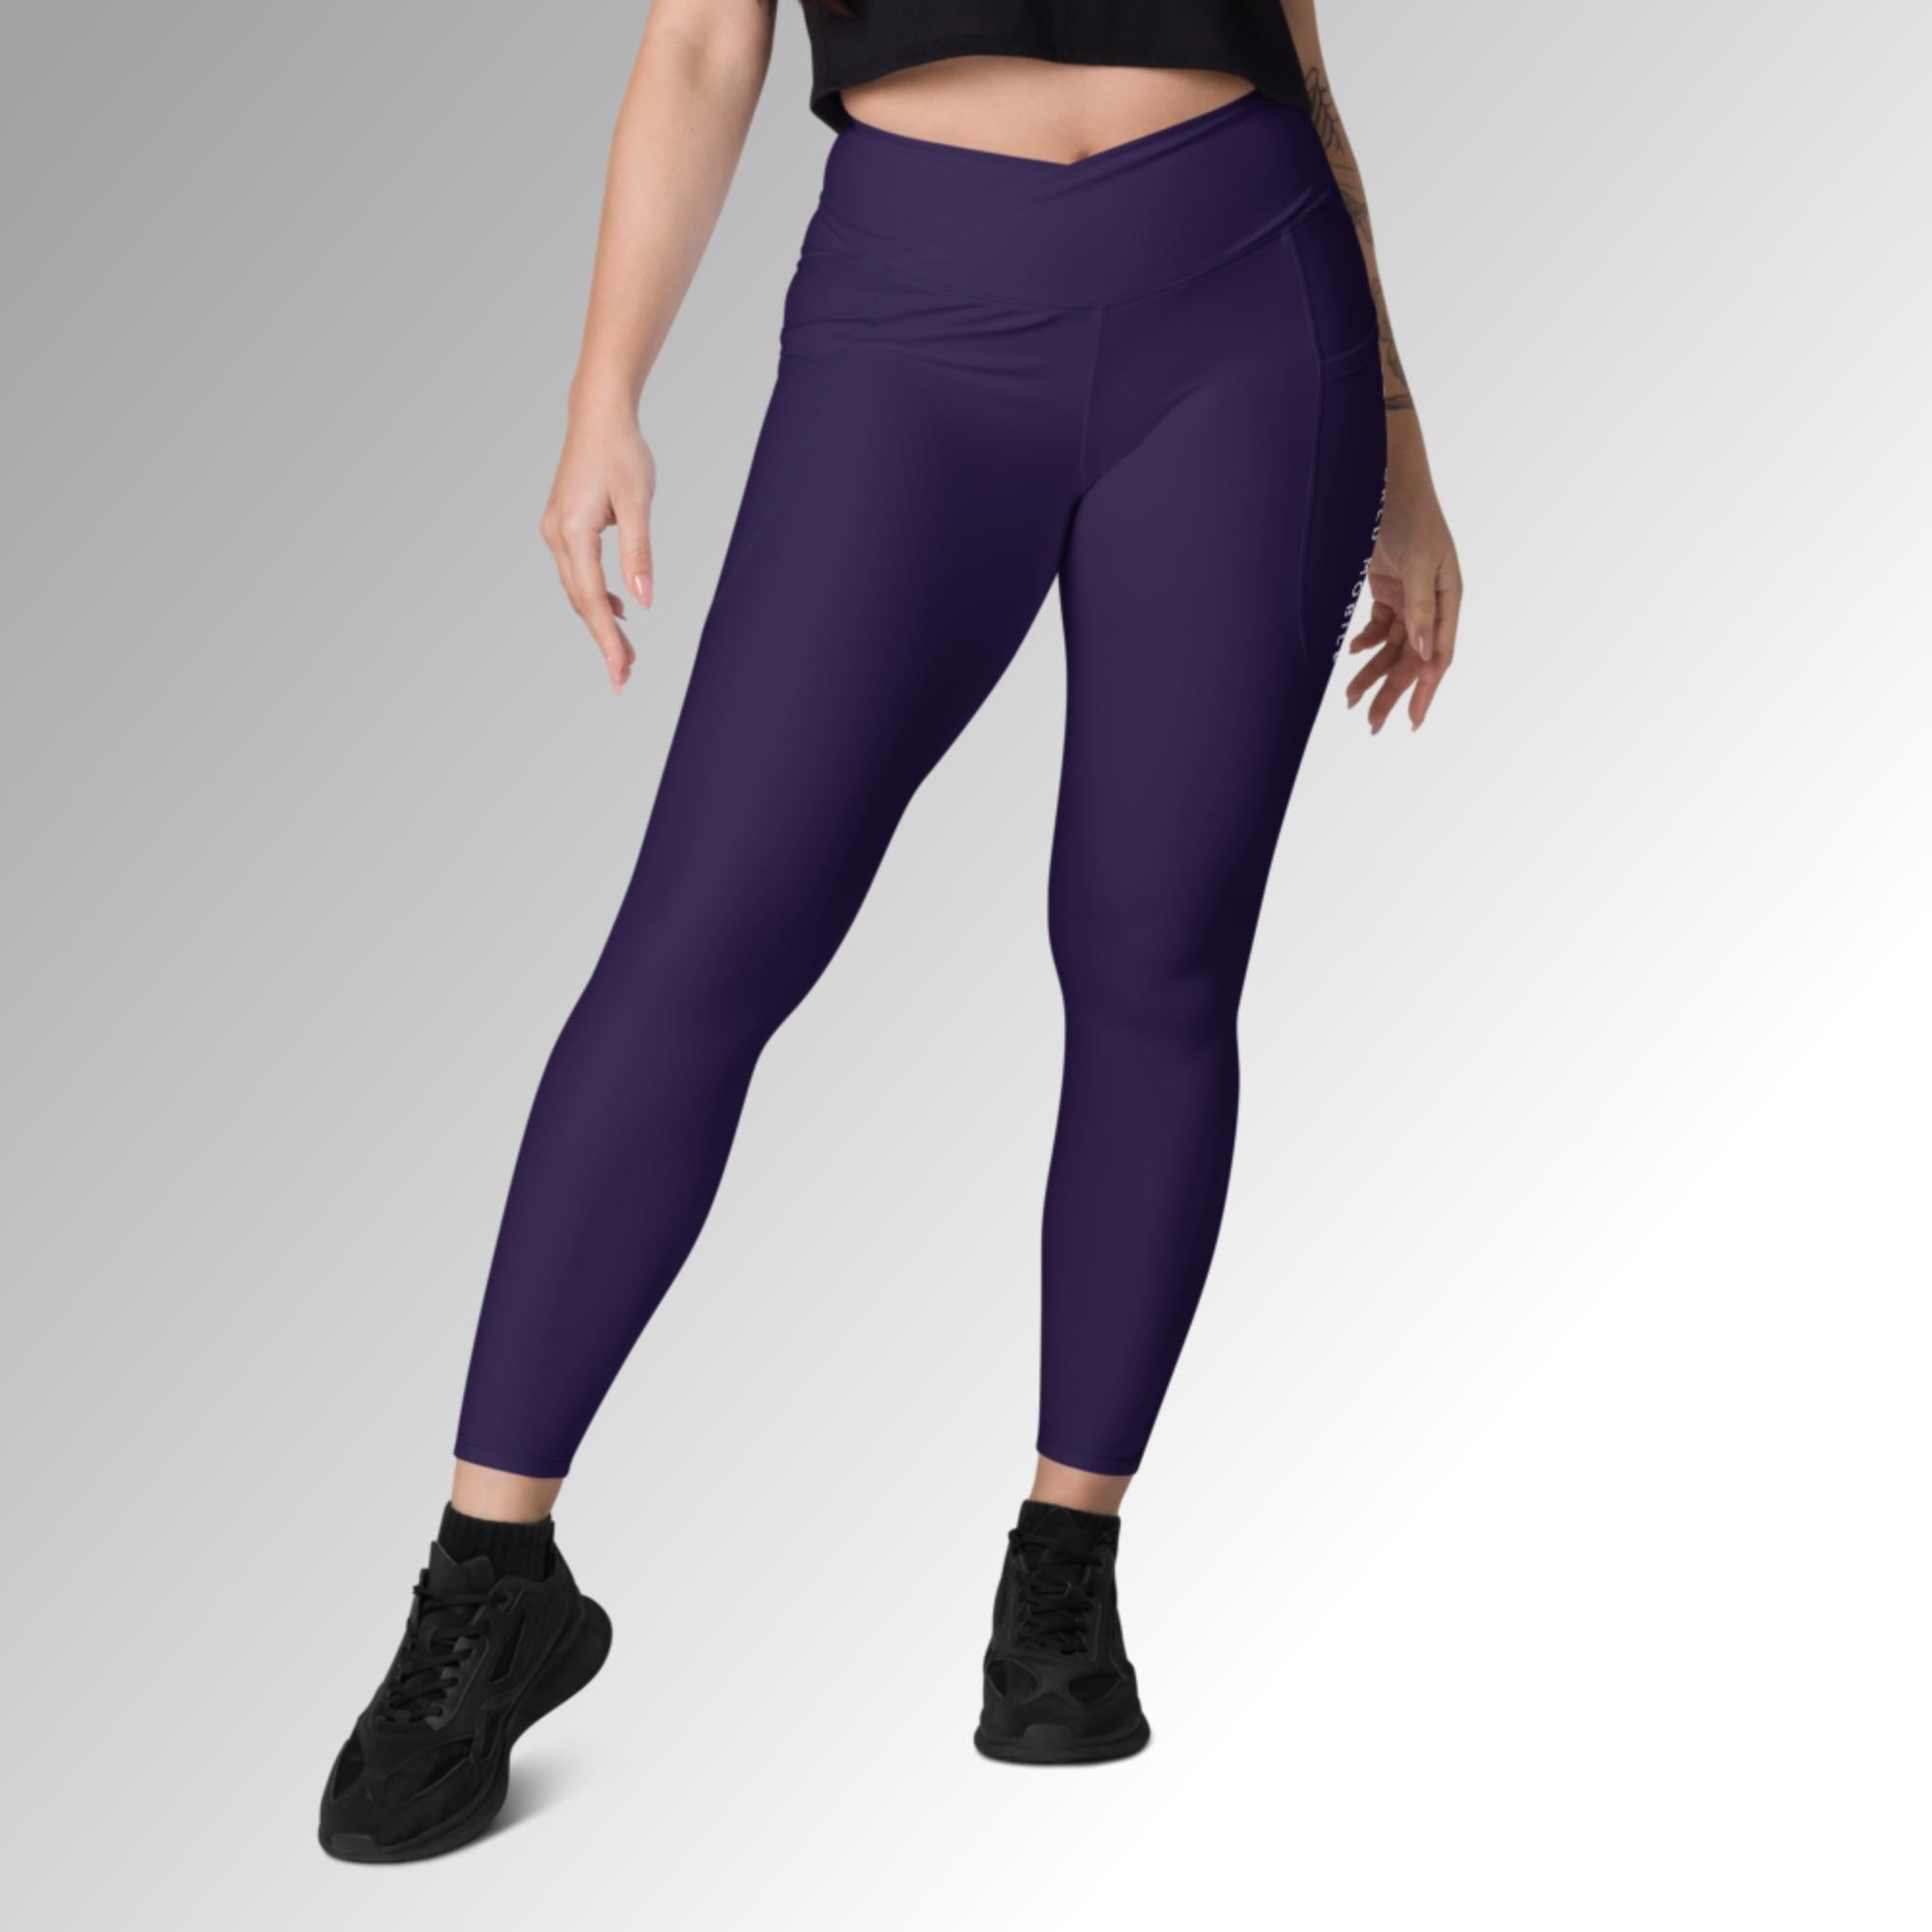 Women's Crossover Leggings with Pockets